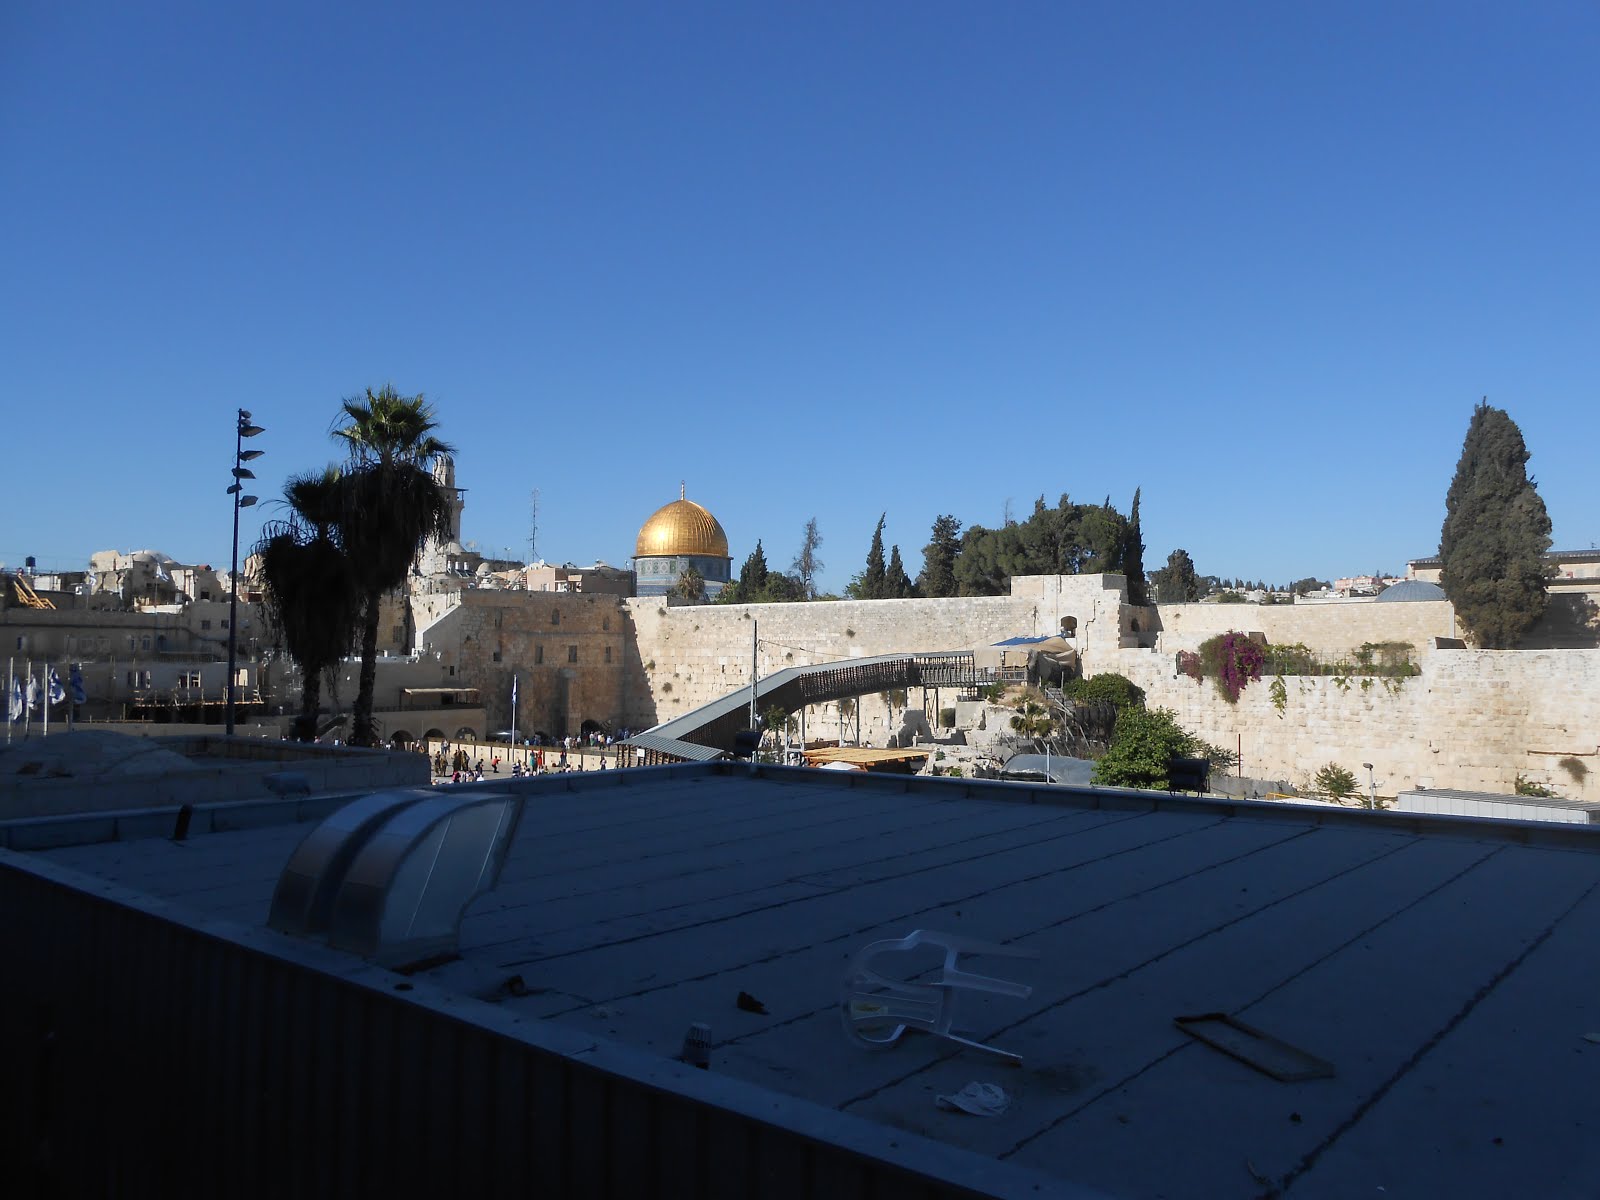 Interning In Israel: Going Back to the Homelanf